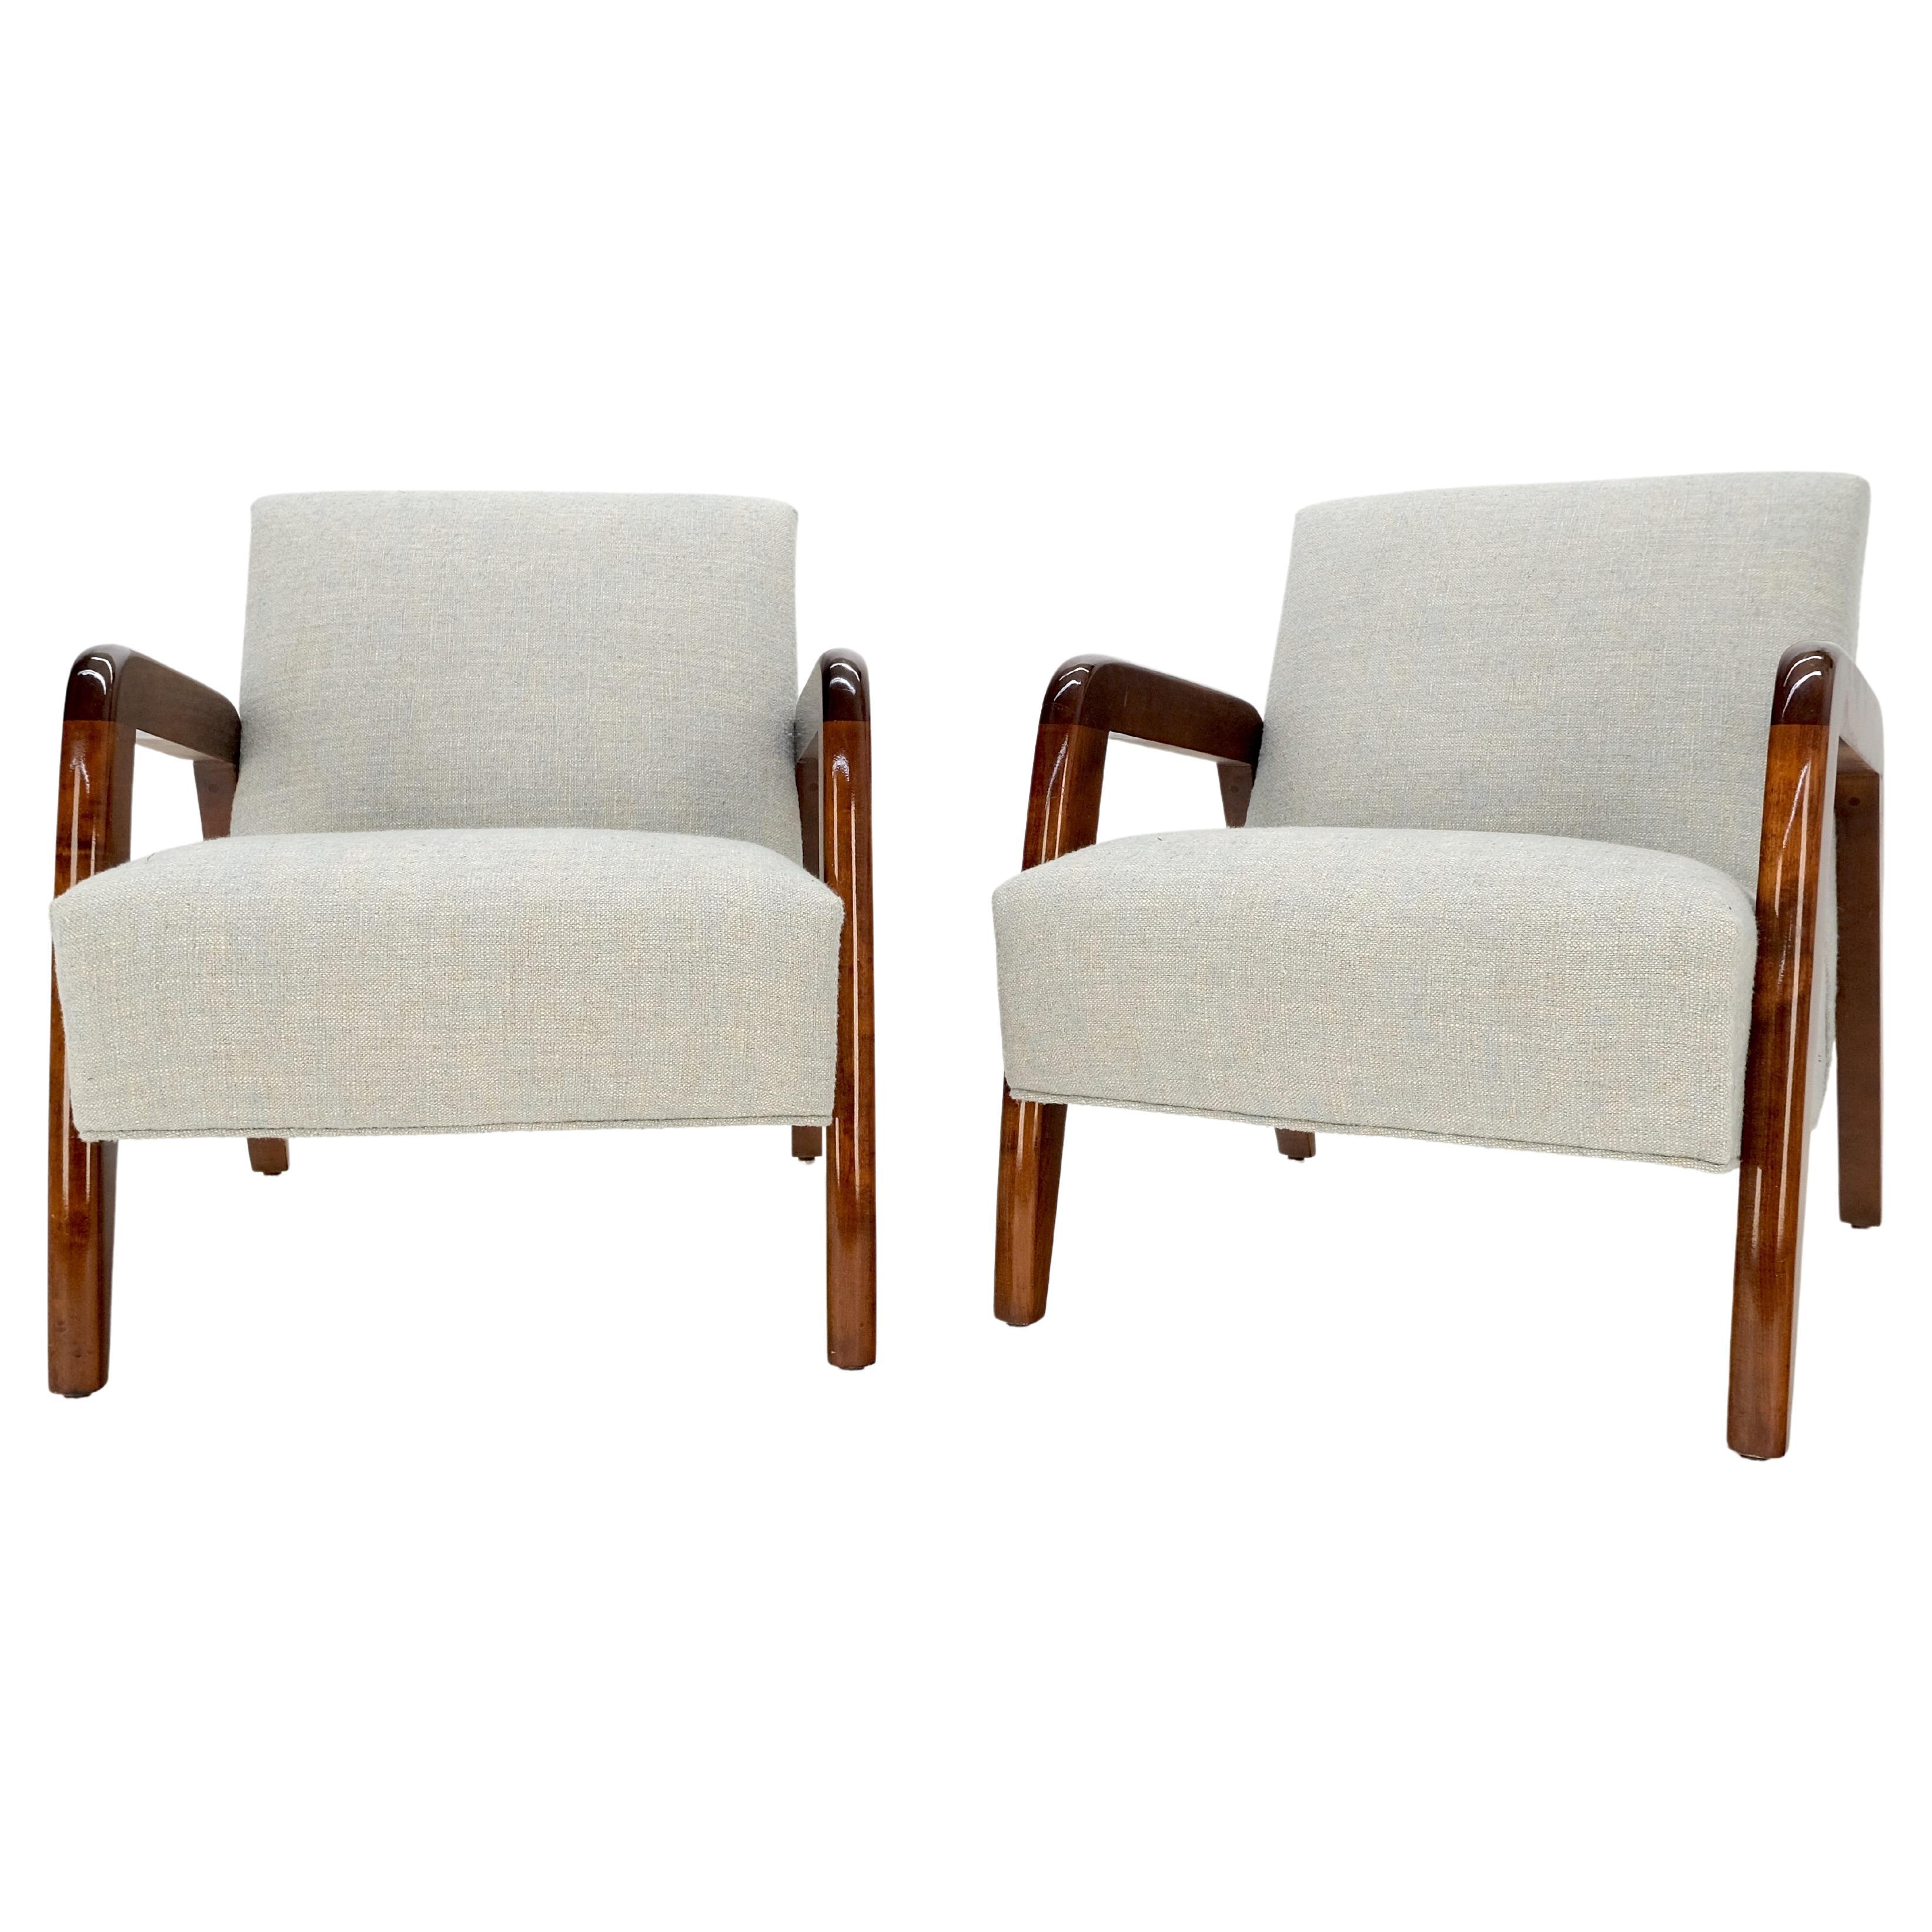 Pair new linen upholstery heavy solid maple frames American Mid-Century Modern lounge chairs mint!